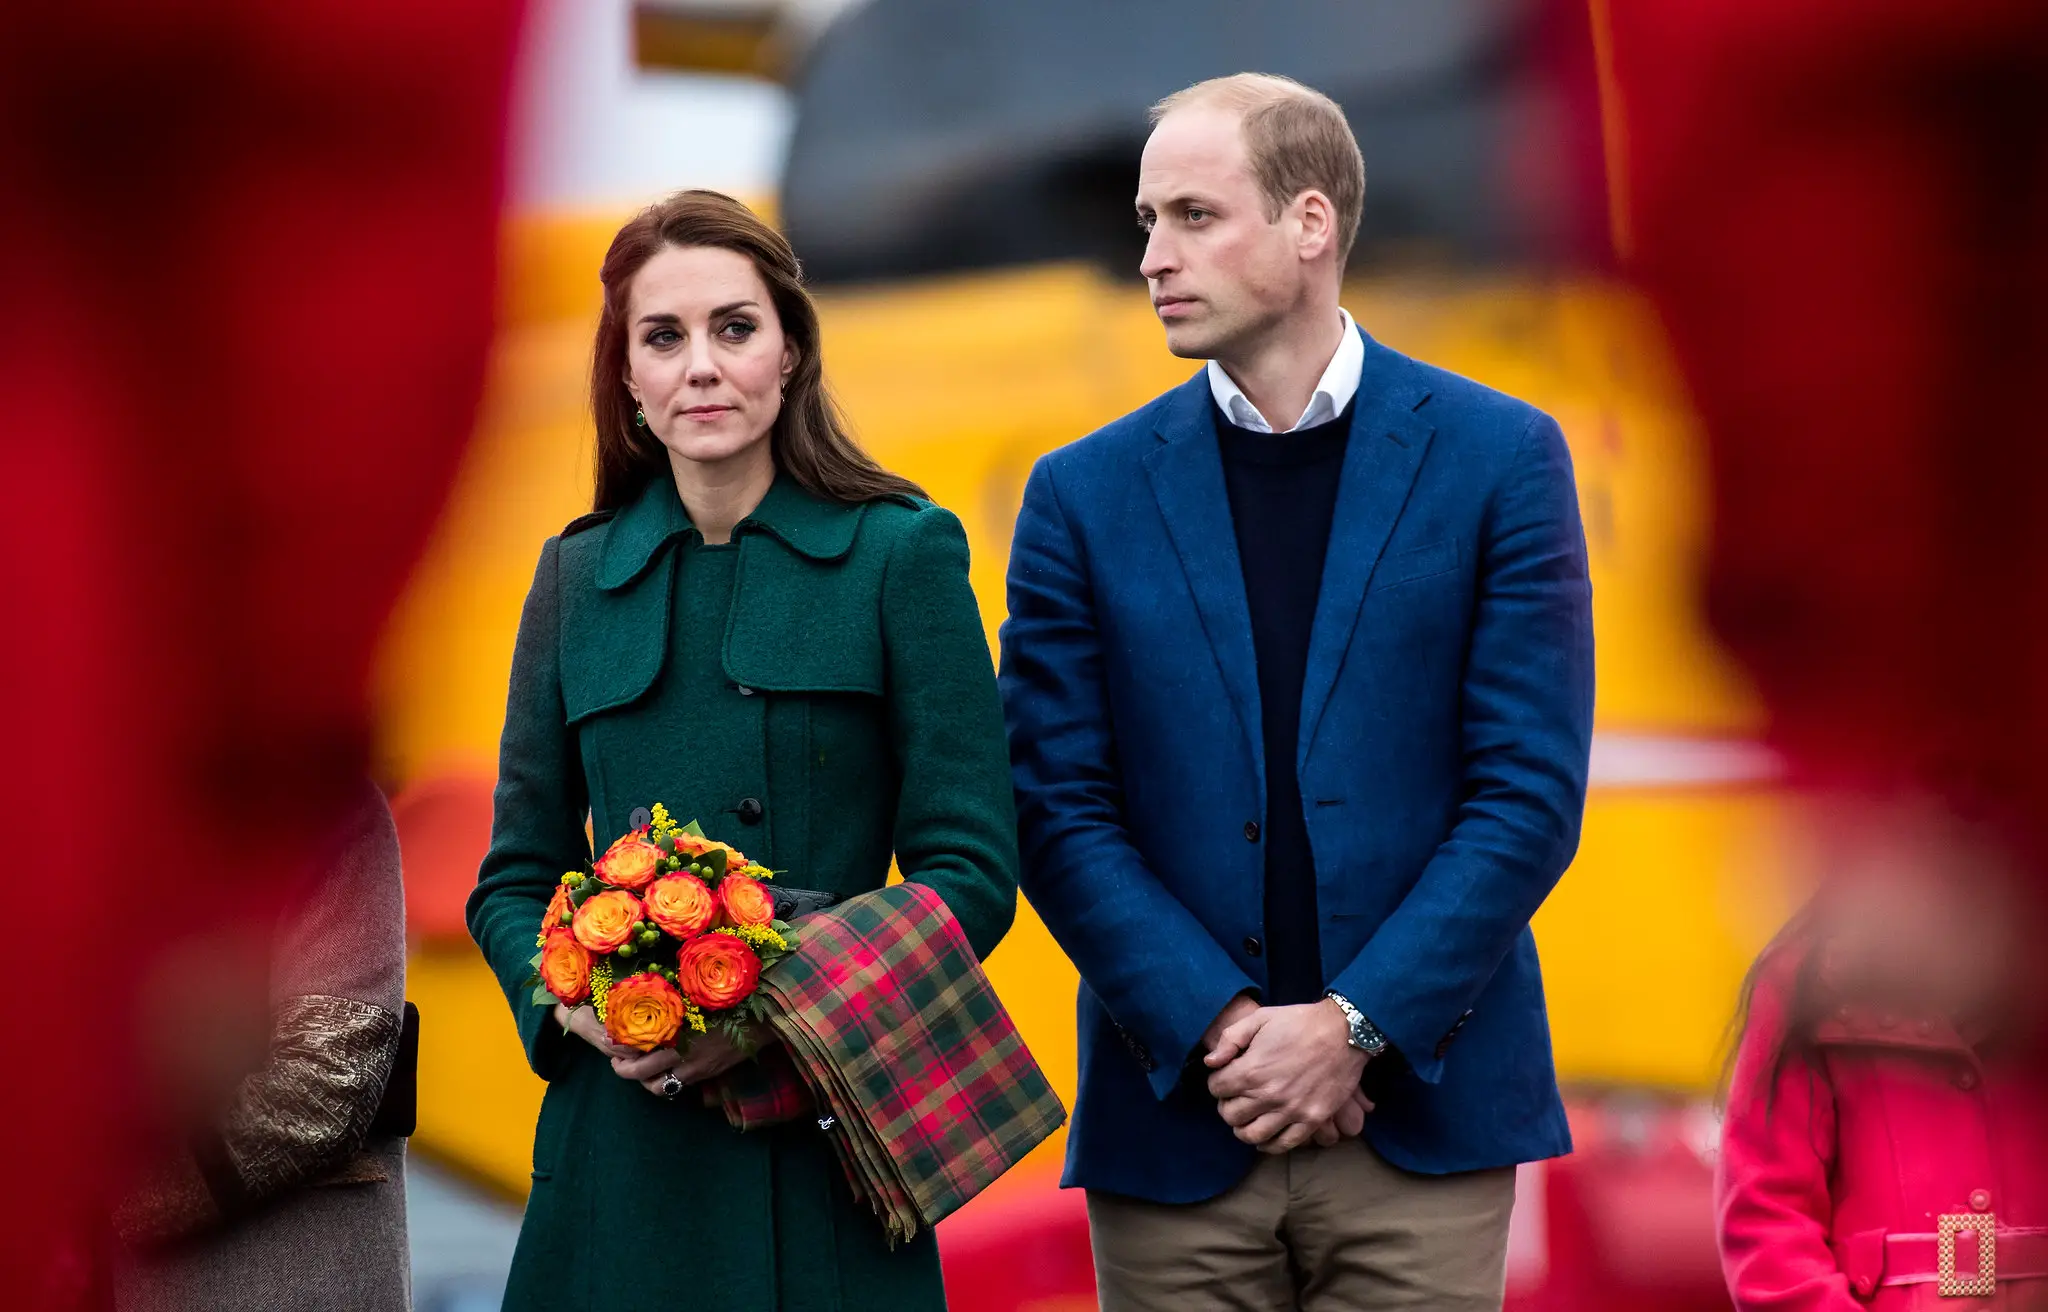 The Duchess of Cambridge carried maple Leaf tartan in 2016 during royal tour of canada